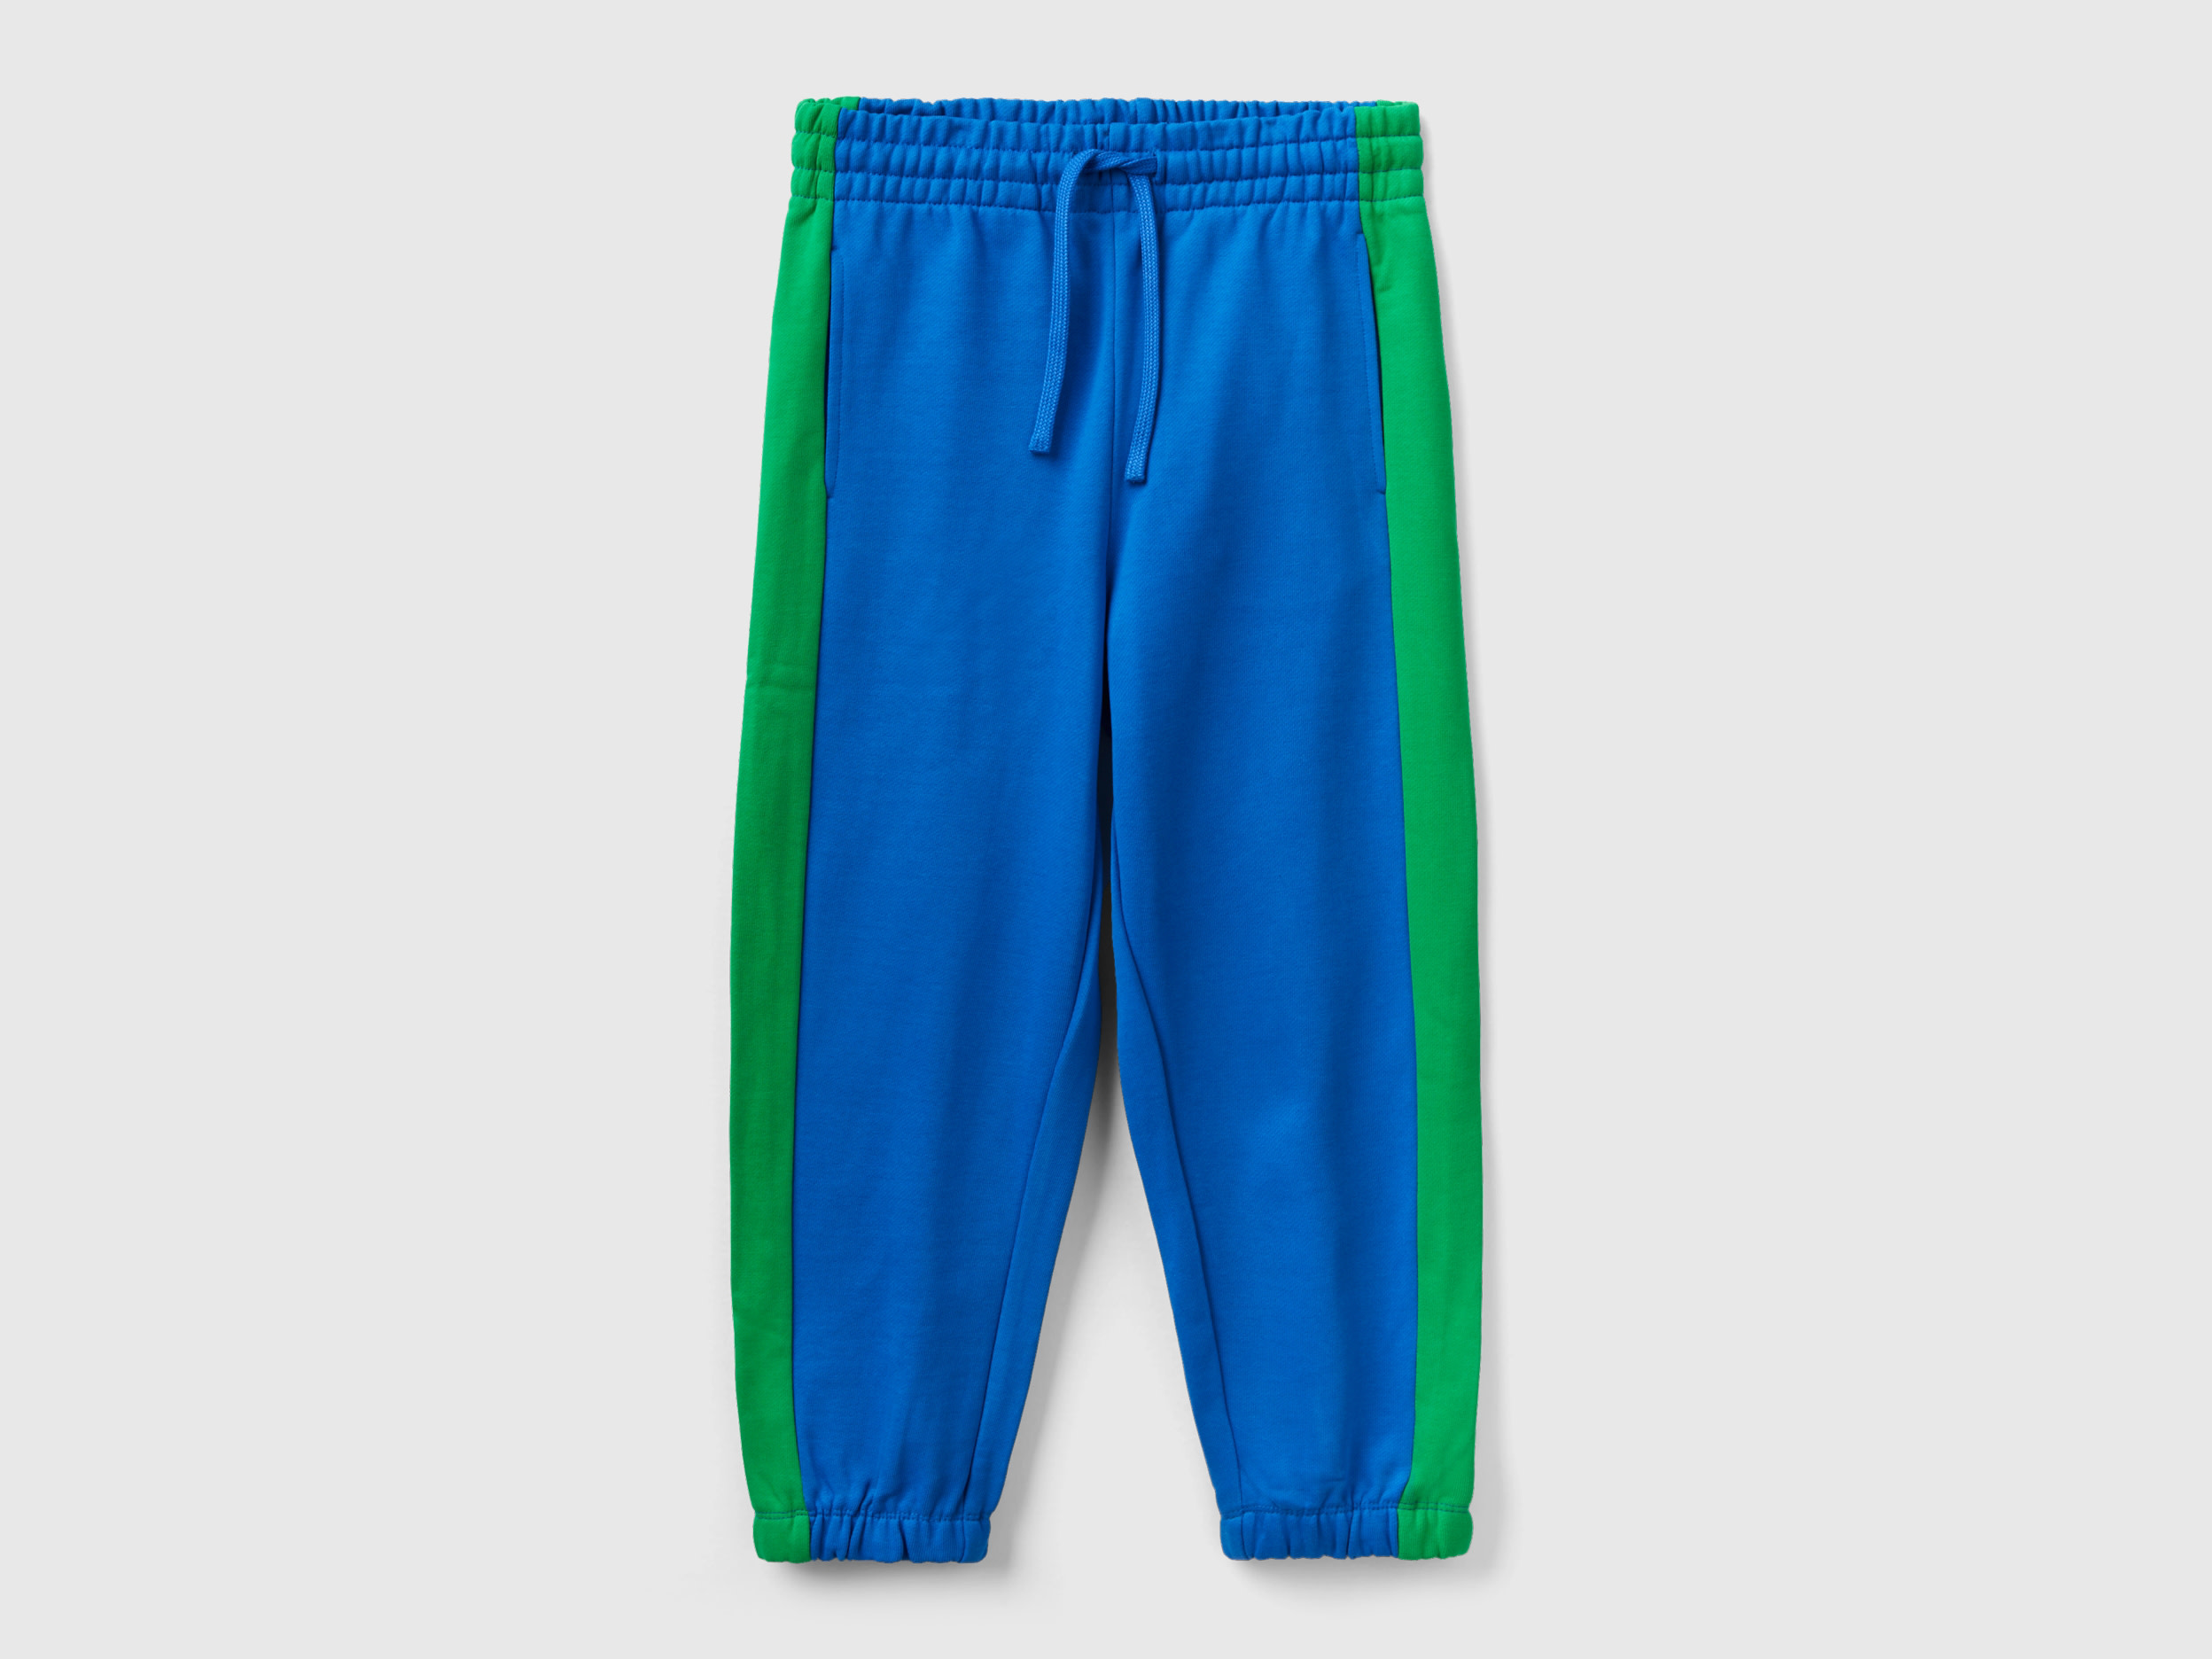 Benetton, Balloon Fit Joggers With Side Bands, size 3XL, Bright Blue, Kids